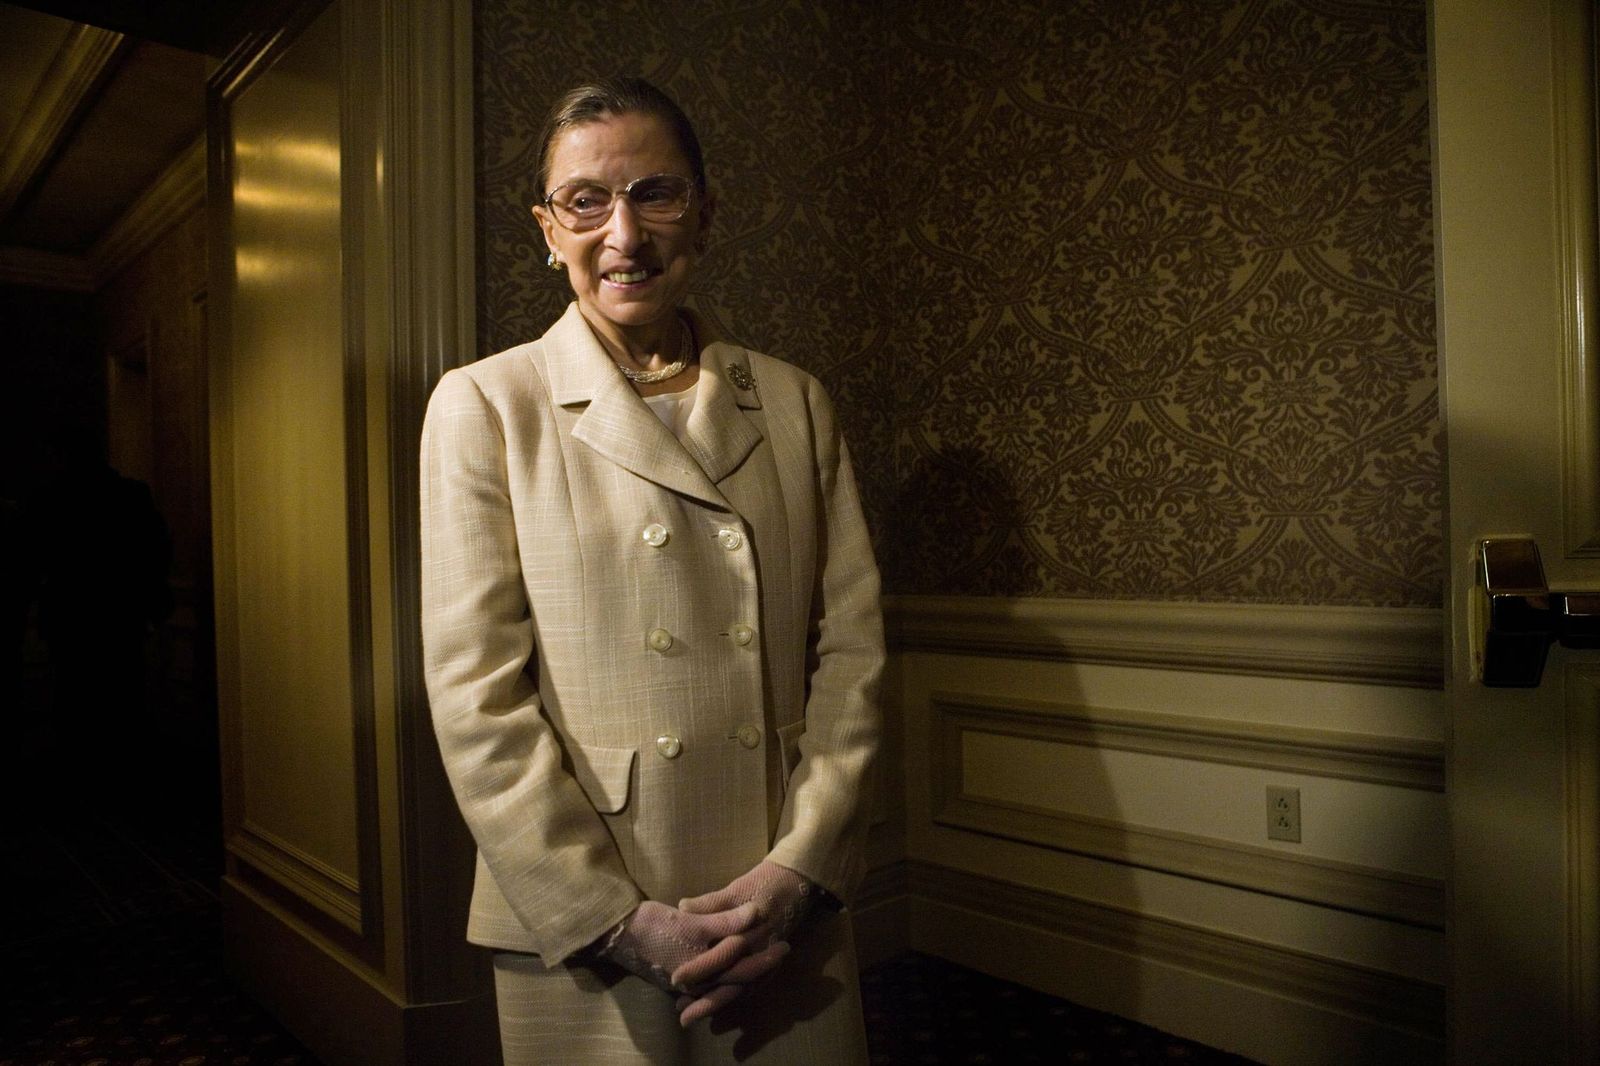 US Supreme Court Justice Ruth Bader Ginsburg at a dinner to honor Chile's first female president Michelle Bachelet on May 8, 2006 | Photo: Getty Images